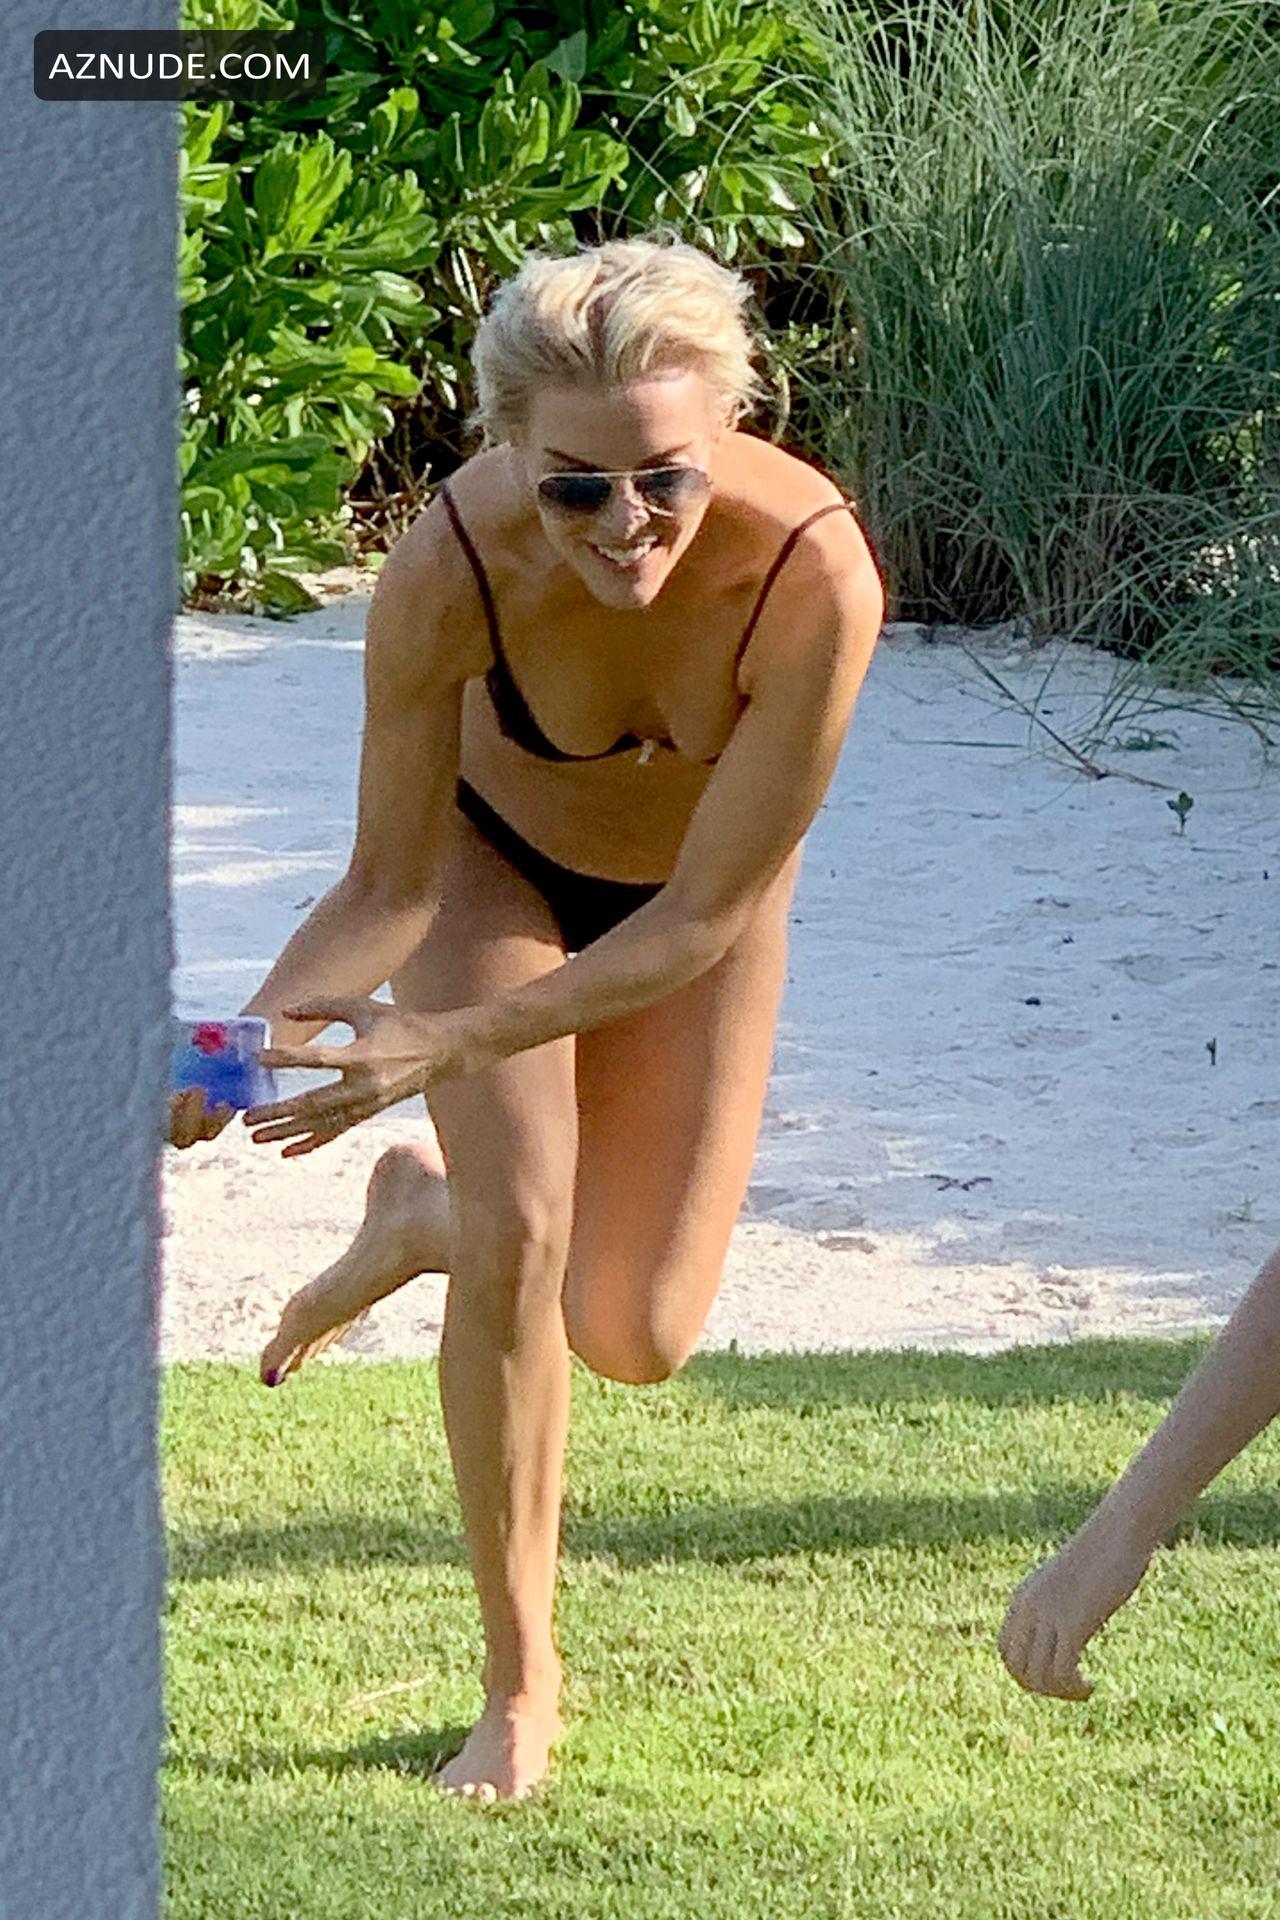 ahmed sudany recommends jaime pressly legs pic